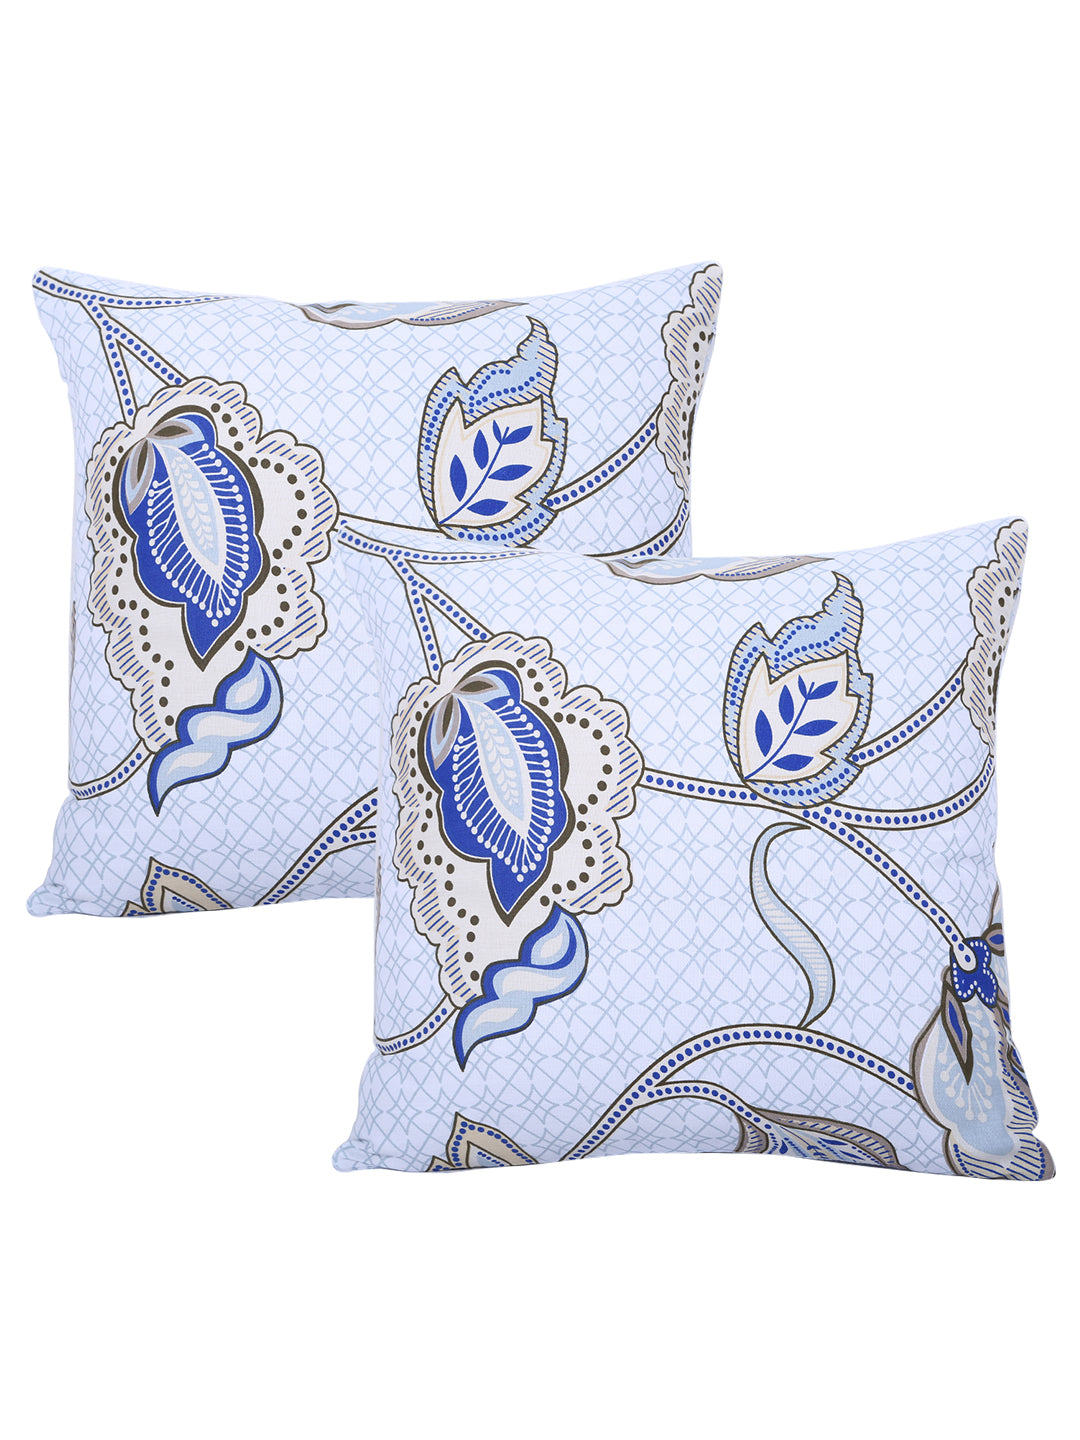 Floral Printed Cotton Diwan Set with Bolster and Cushion Covers - Blue